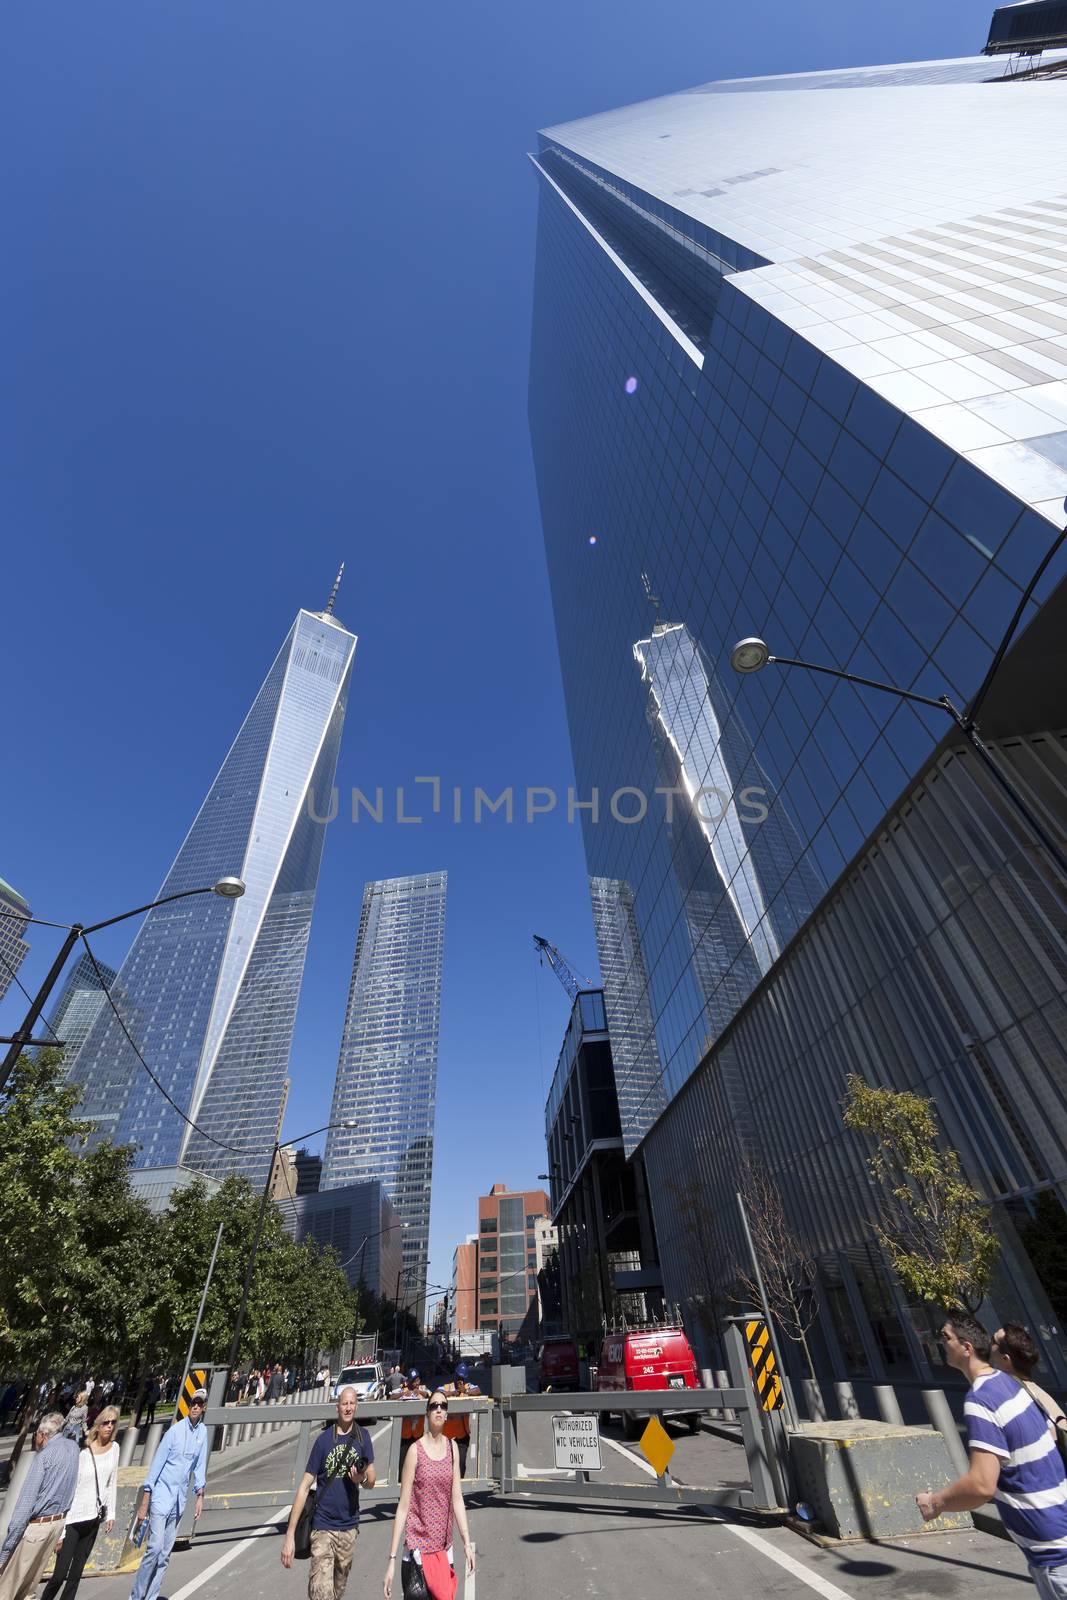 New York City, USA - September 27, 2014 : NYC's September 11 Memorial  in New York Downtown. The memorial was dedicated on the 10th anniversary of the Sept. 11, 2001 attacks.